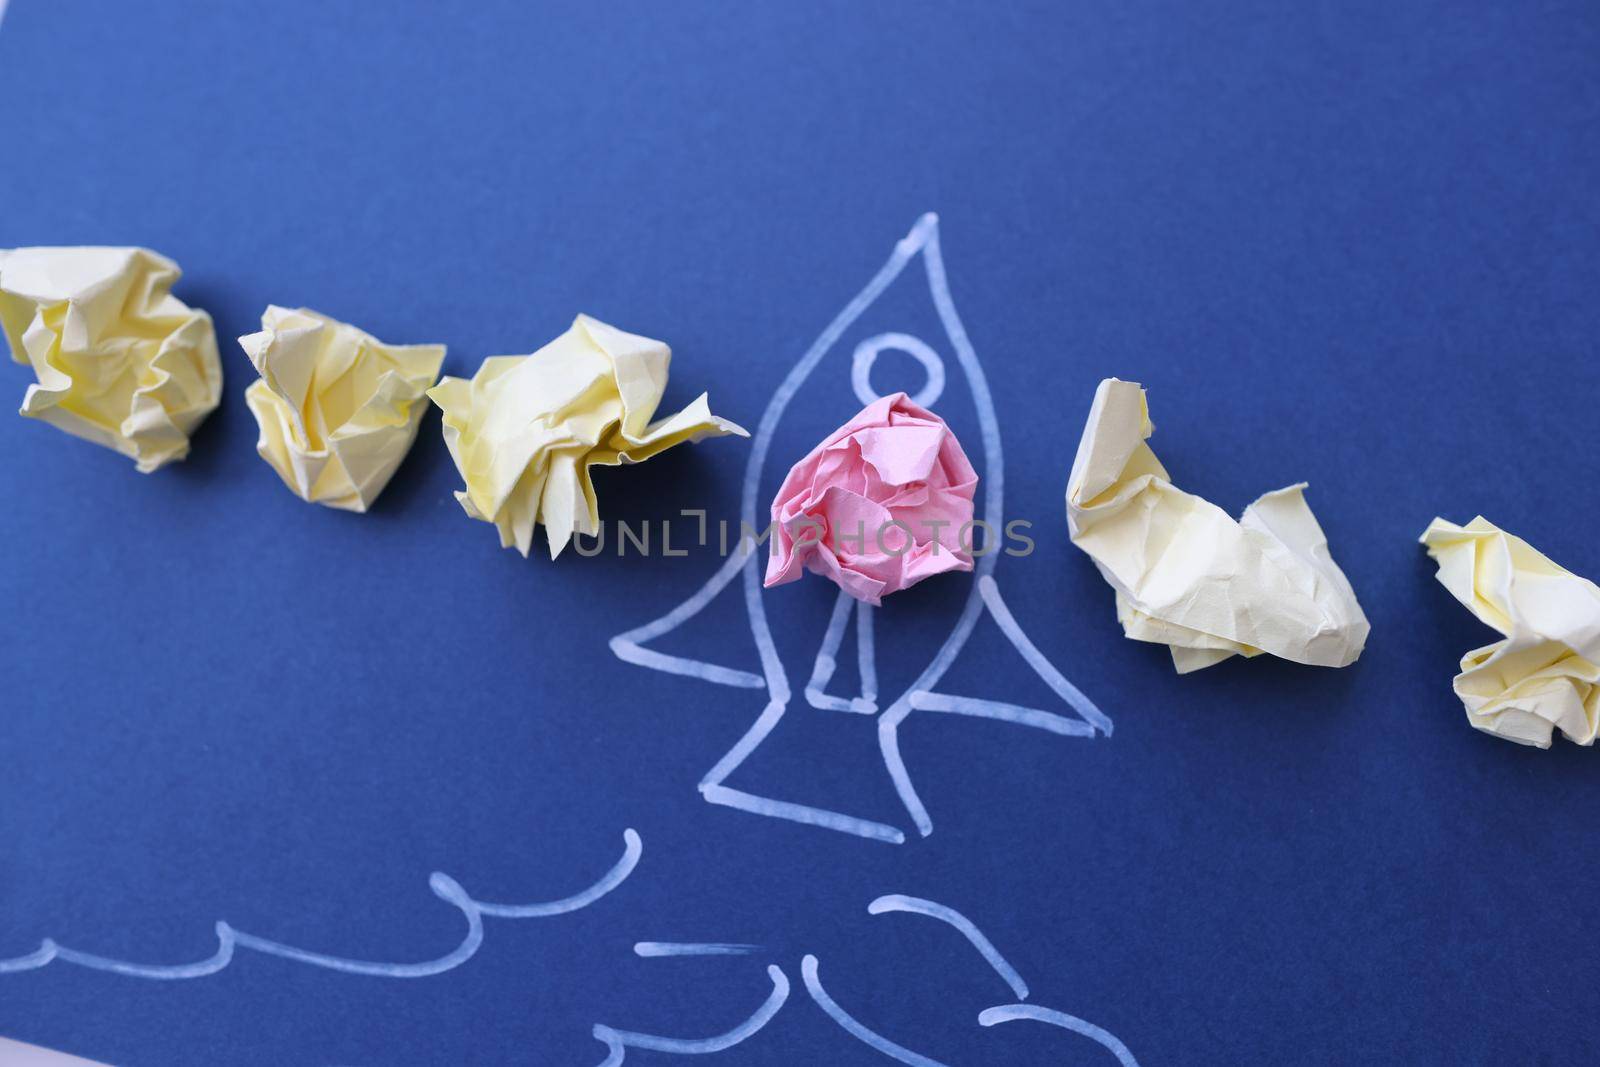 Drawn rocket with crumpled stickers and launch up. New creative ideas in business concept